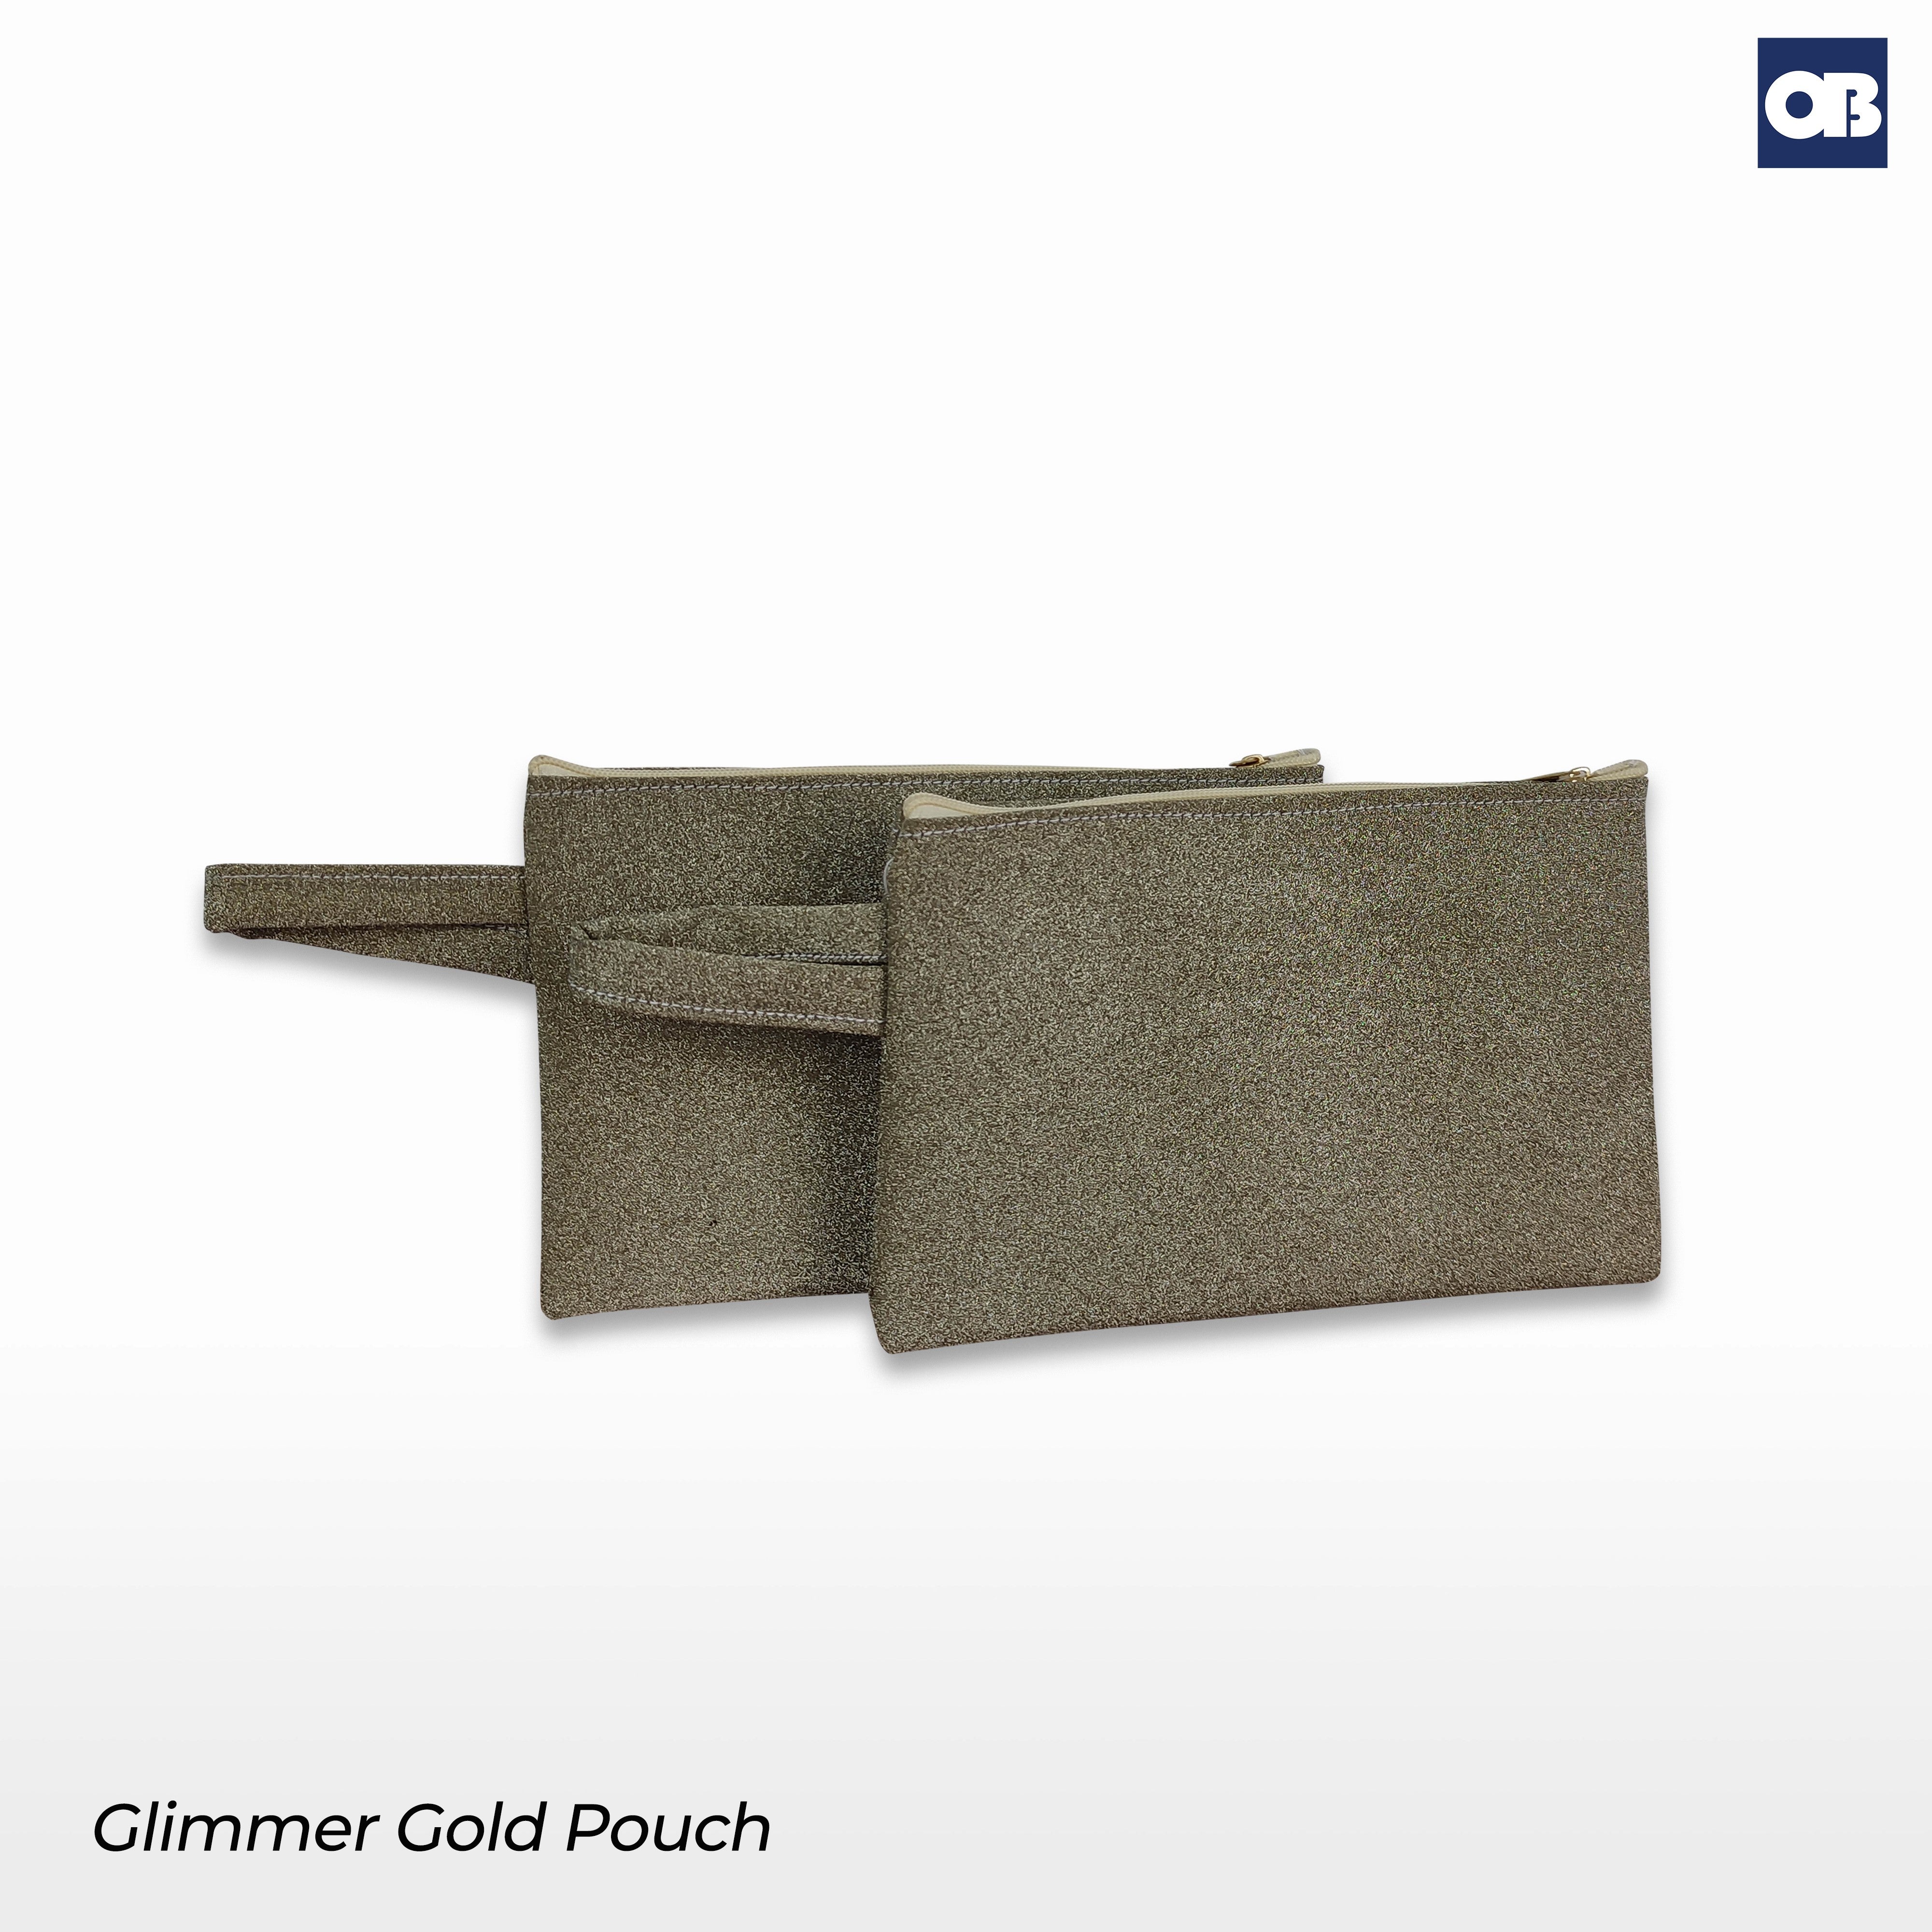 OB Glimmer Gold Pouch